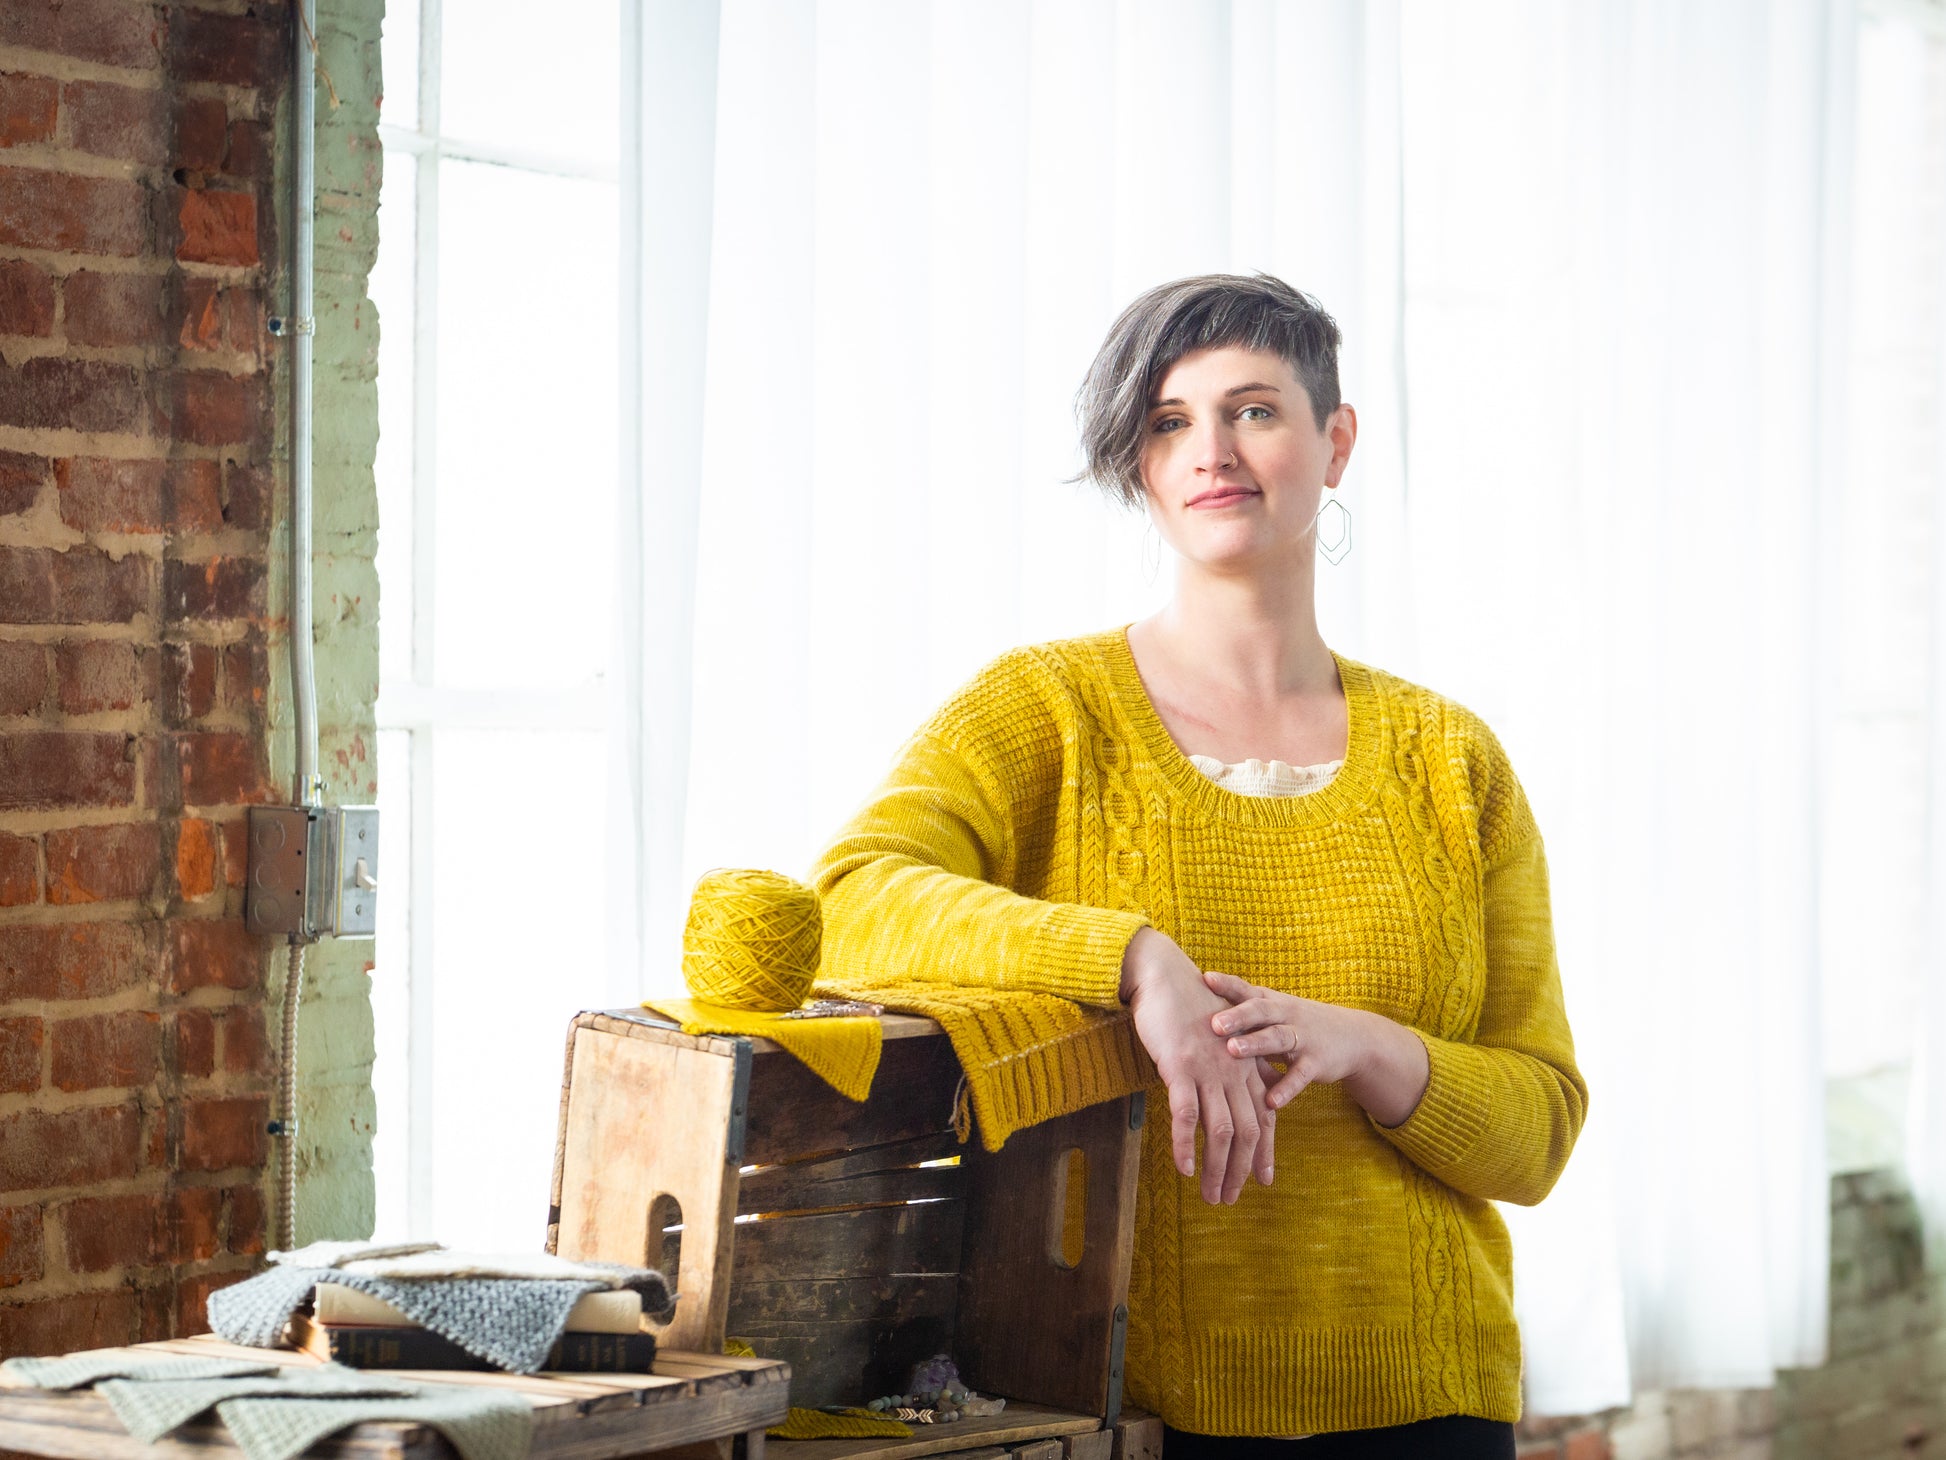 Jen leans against a wooden box, smiling at the camera. She wears a hand knit, bright yellow sweater. The scoop neck shows a white camisole underneath. A matching ball and swatch of yellow yarn can be seen.